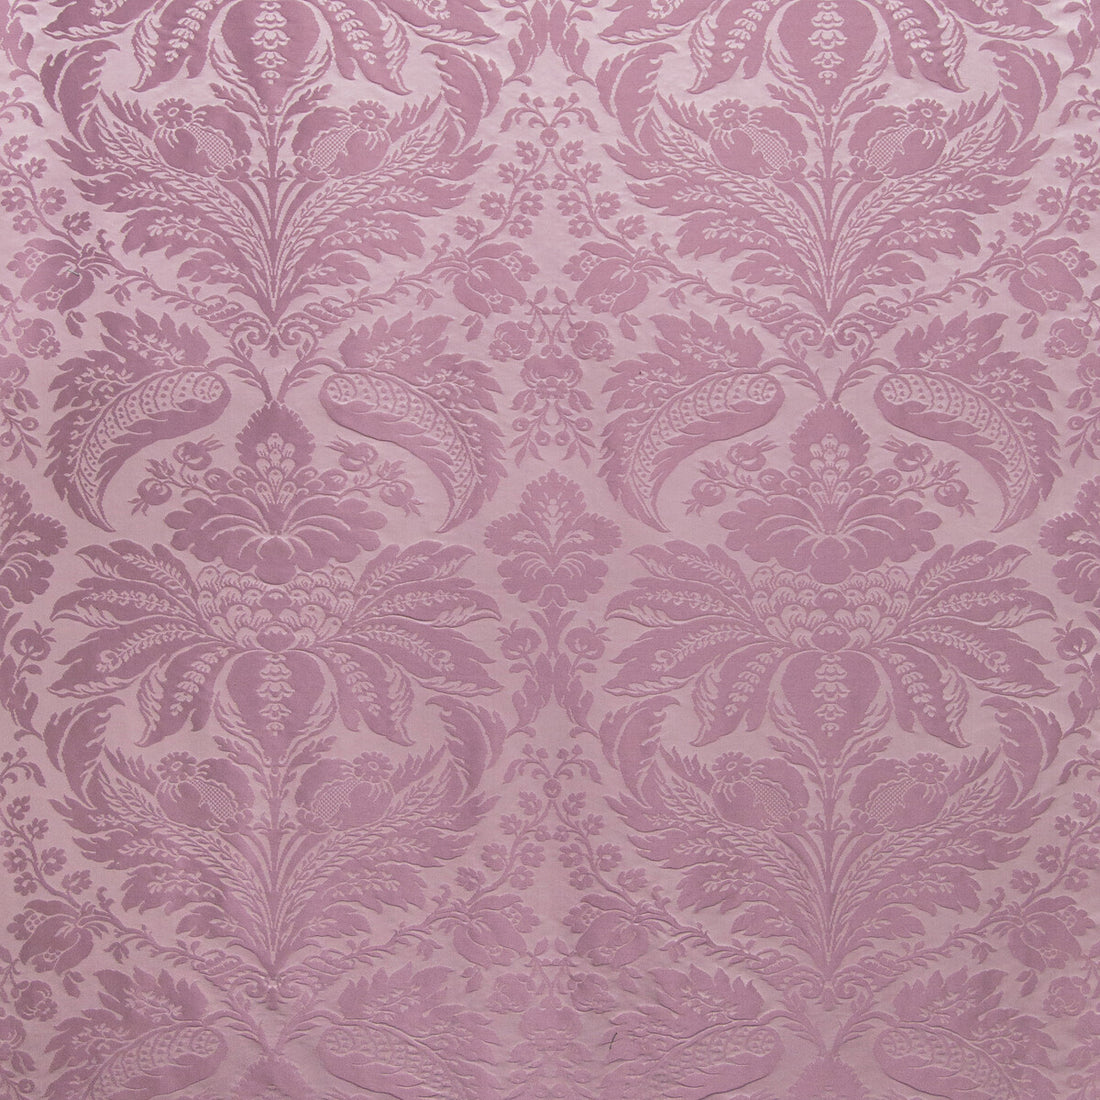 Damask Pierre fabric in lavender color - pattern 8013188.1110.0 - by Brunschwig &amp; Fils in the B&amp;F Showroom Exclusive 2019 collection